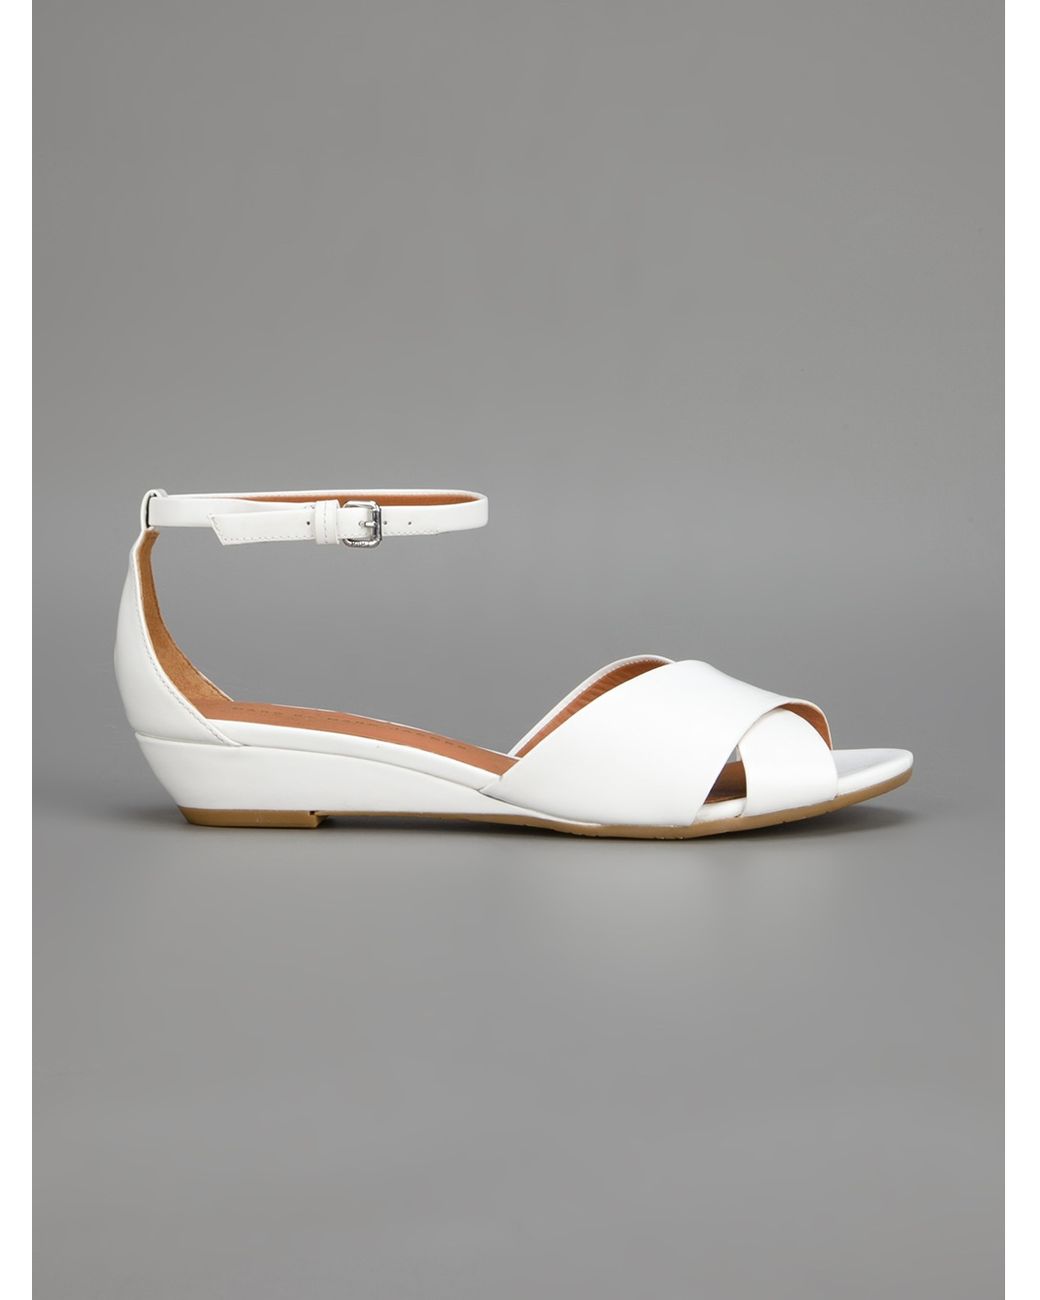 Marc By Marc Jacobs Low Wedge Sandal in White | Lyst